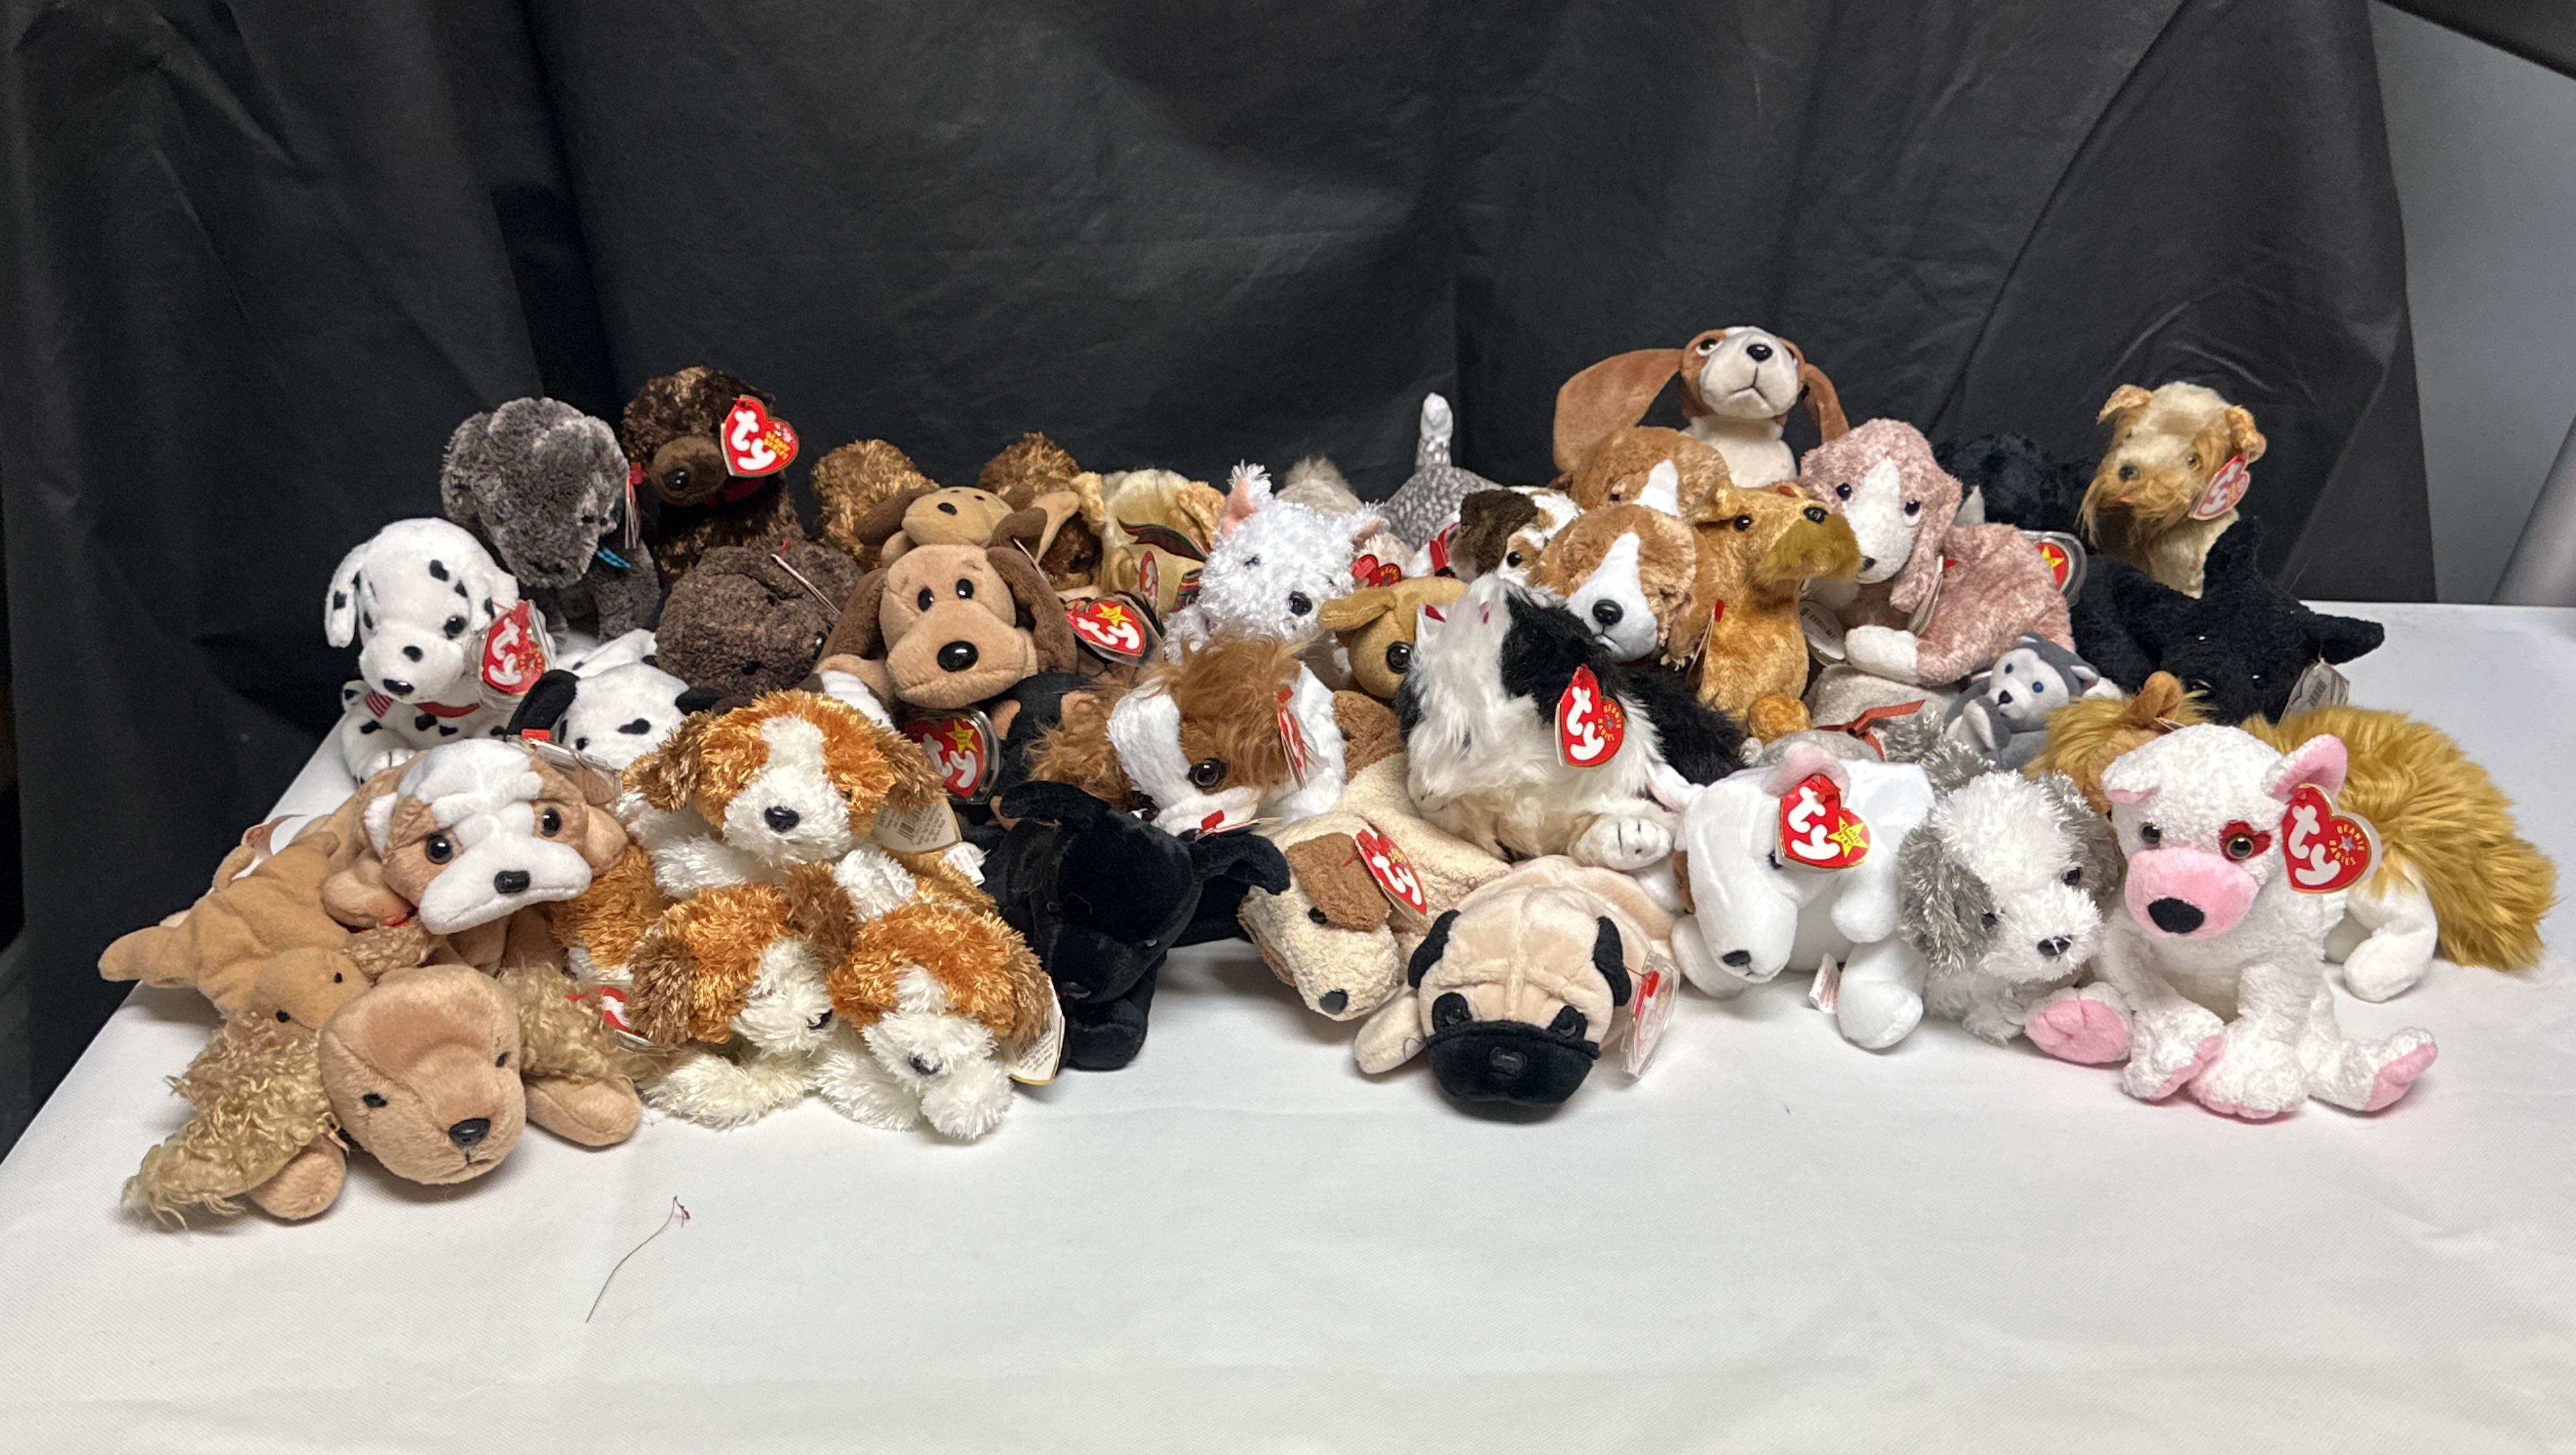 Retired TY Beanie Babies See Description and Pick Your Beanie F 